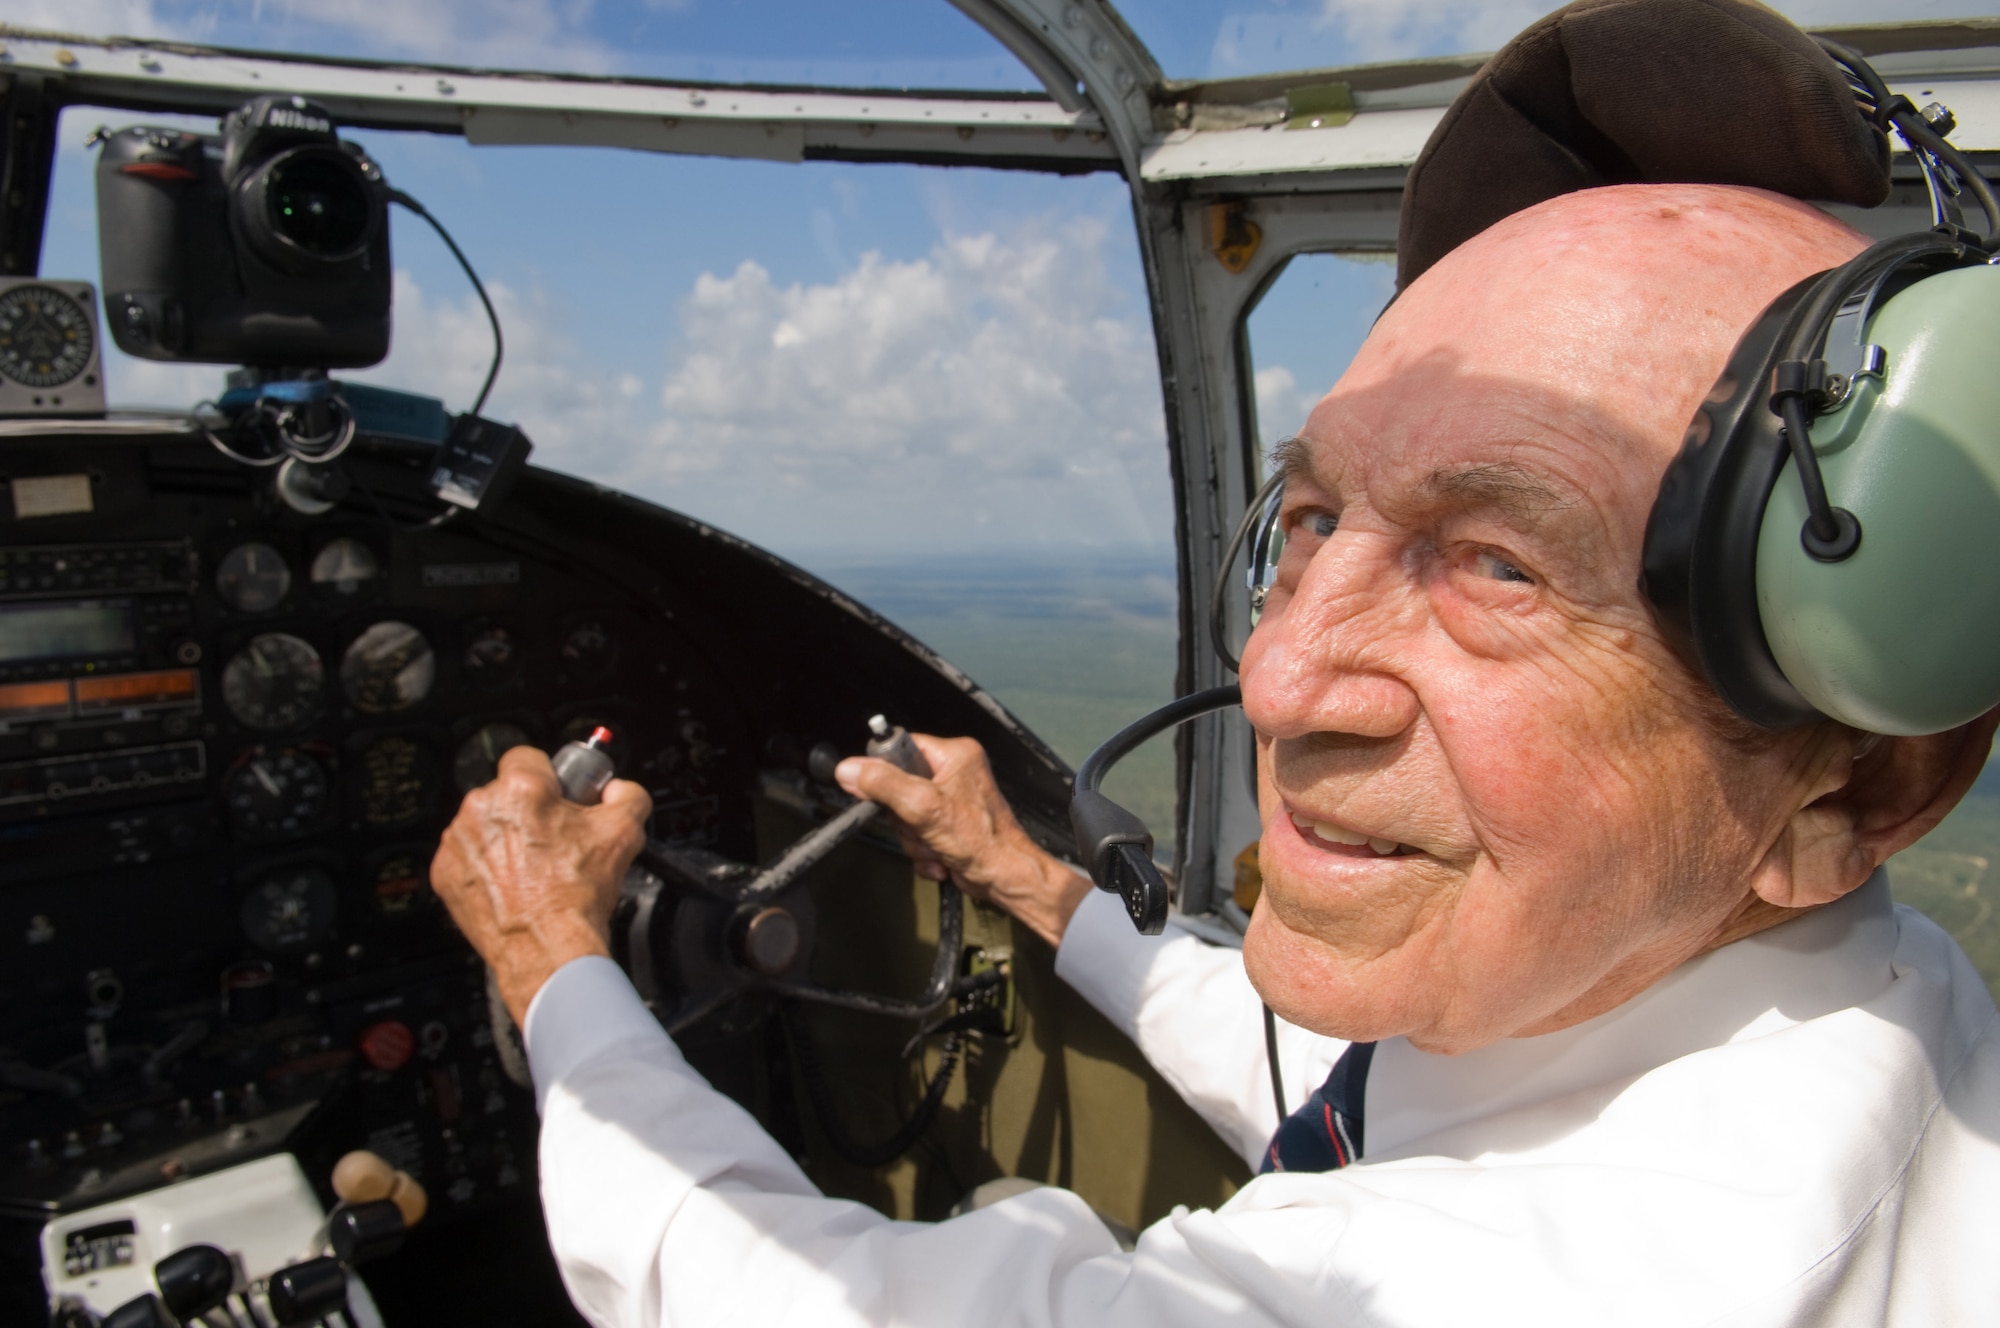 (Highest rank achieved/rank during raid) Lt. Col. / Lt. Robert E. Cole, co-pilot and survivor of the Doolittle Raid on Tokyo, happily piloted a holding pattern over Eglin Air Force Base prior to the Doolittle Raiders Training Reenactment at Duke Field on on May 31, 2008.  (U.S. Air Force photo by Lance Cheung)